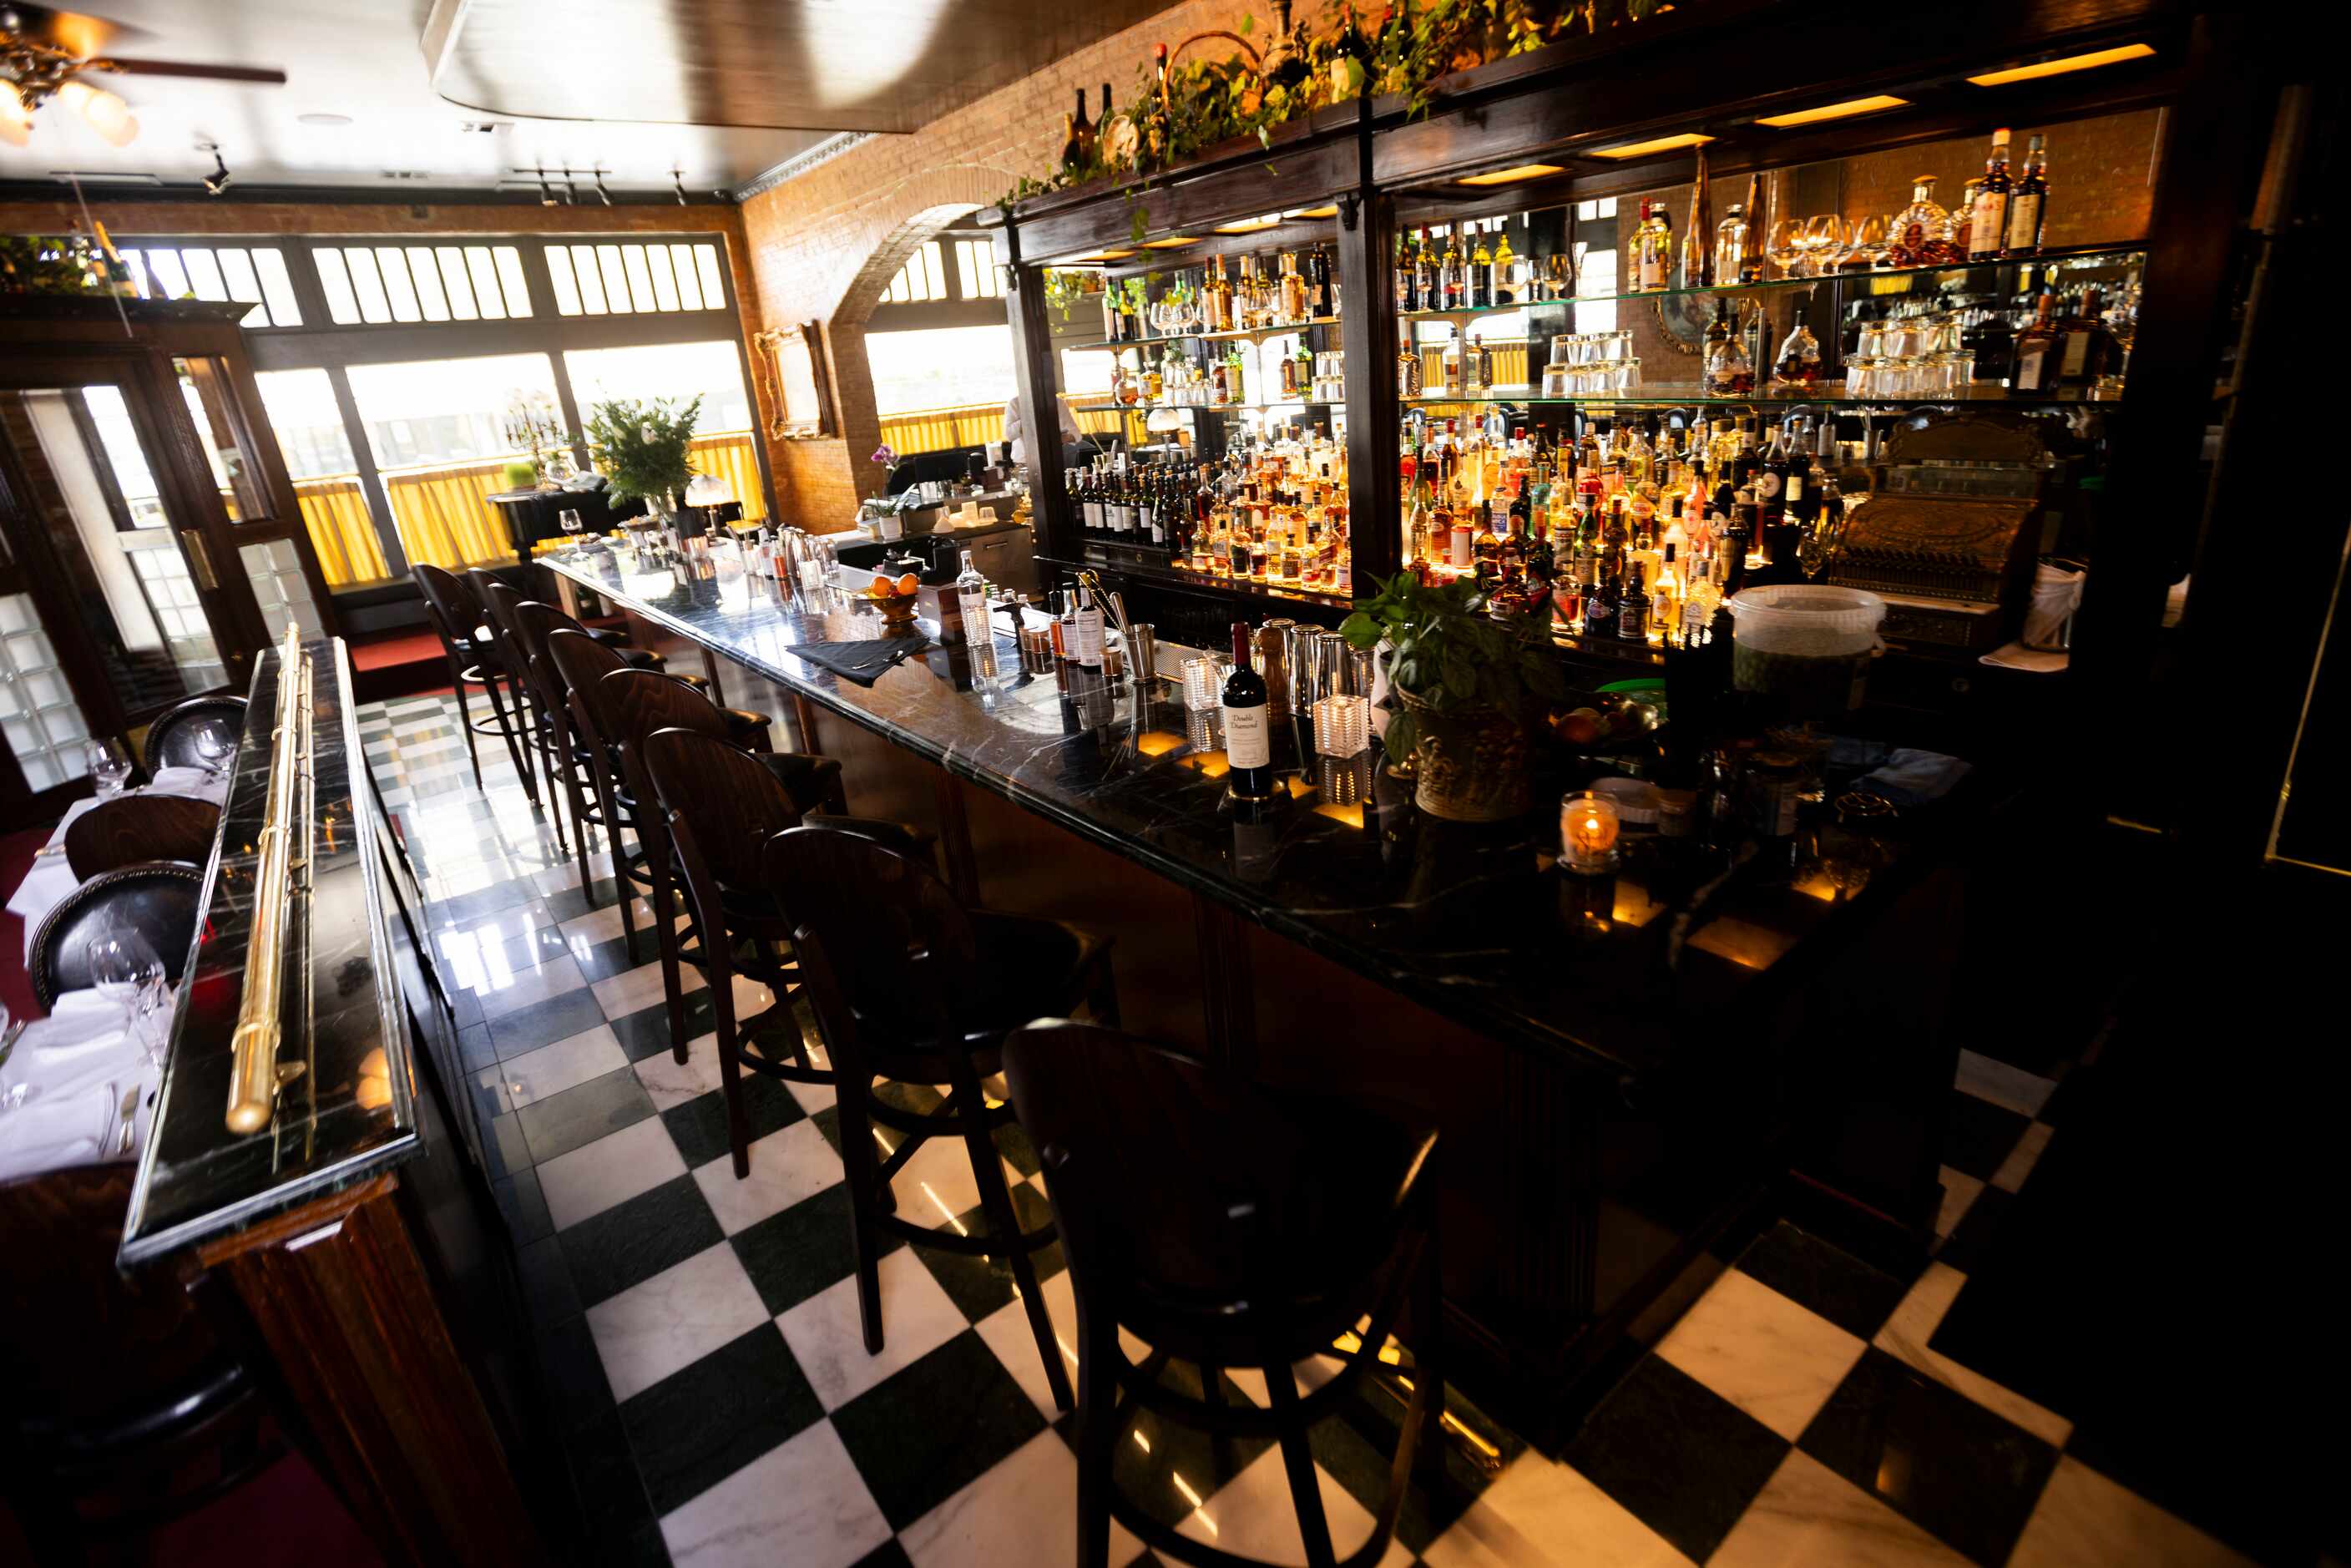 St. Martin's Wine Bistro in Dallas has a black-and-white tile floor and the original bar.